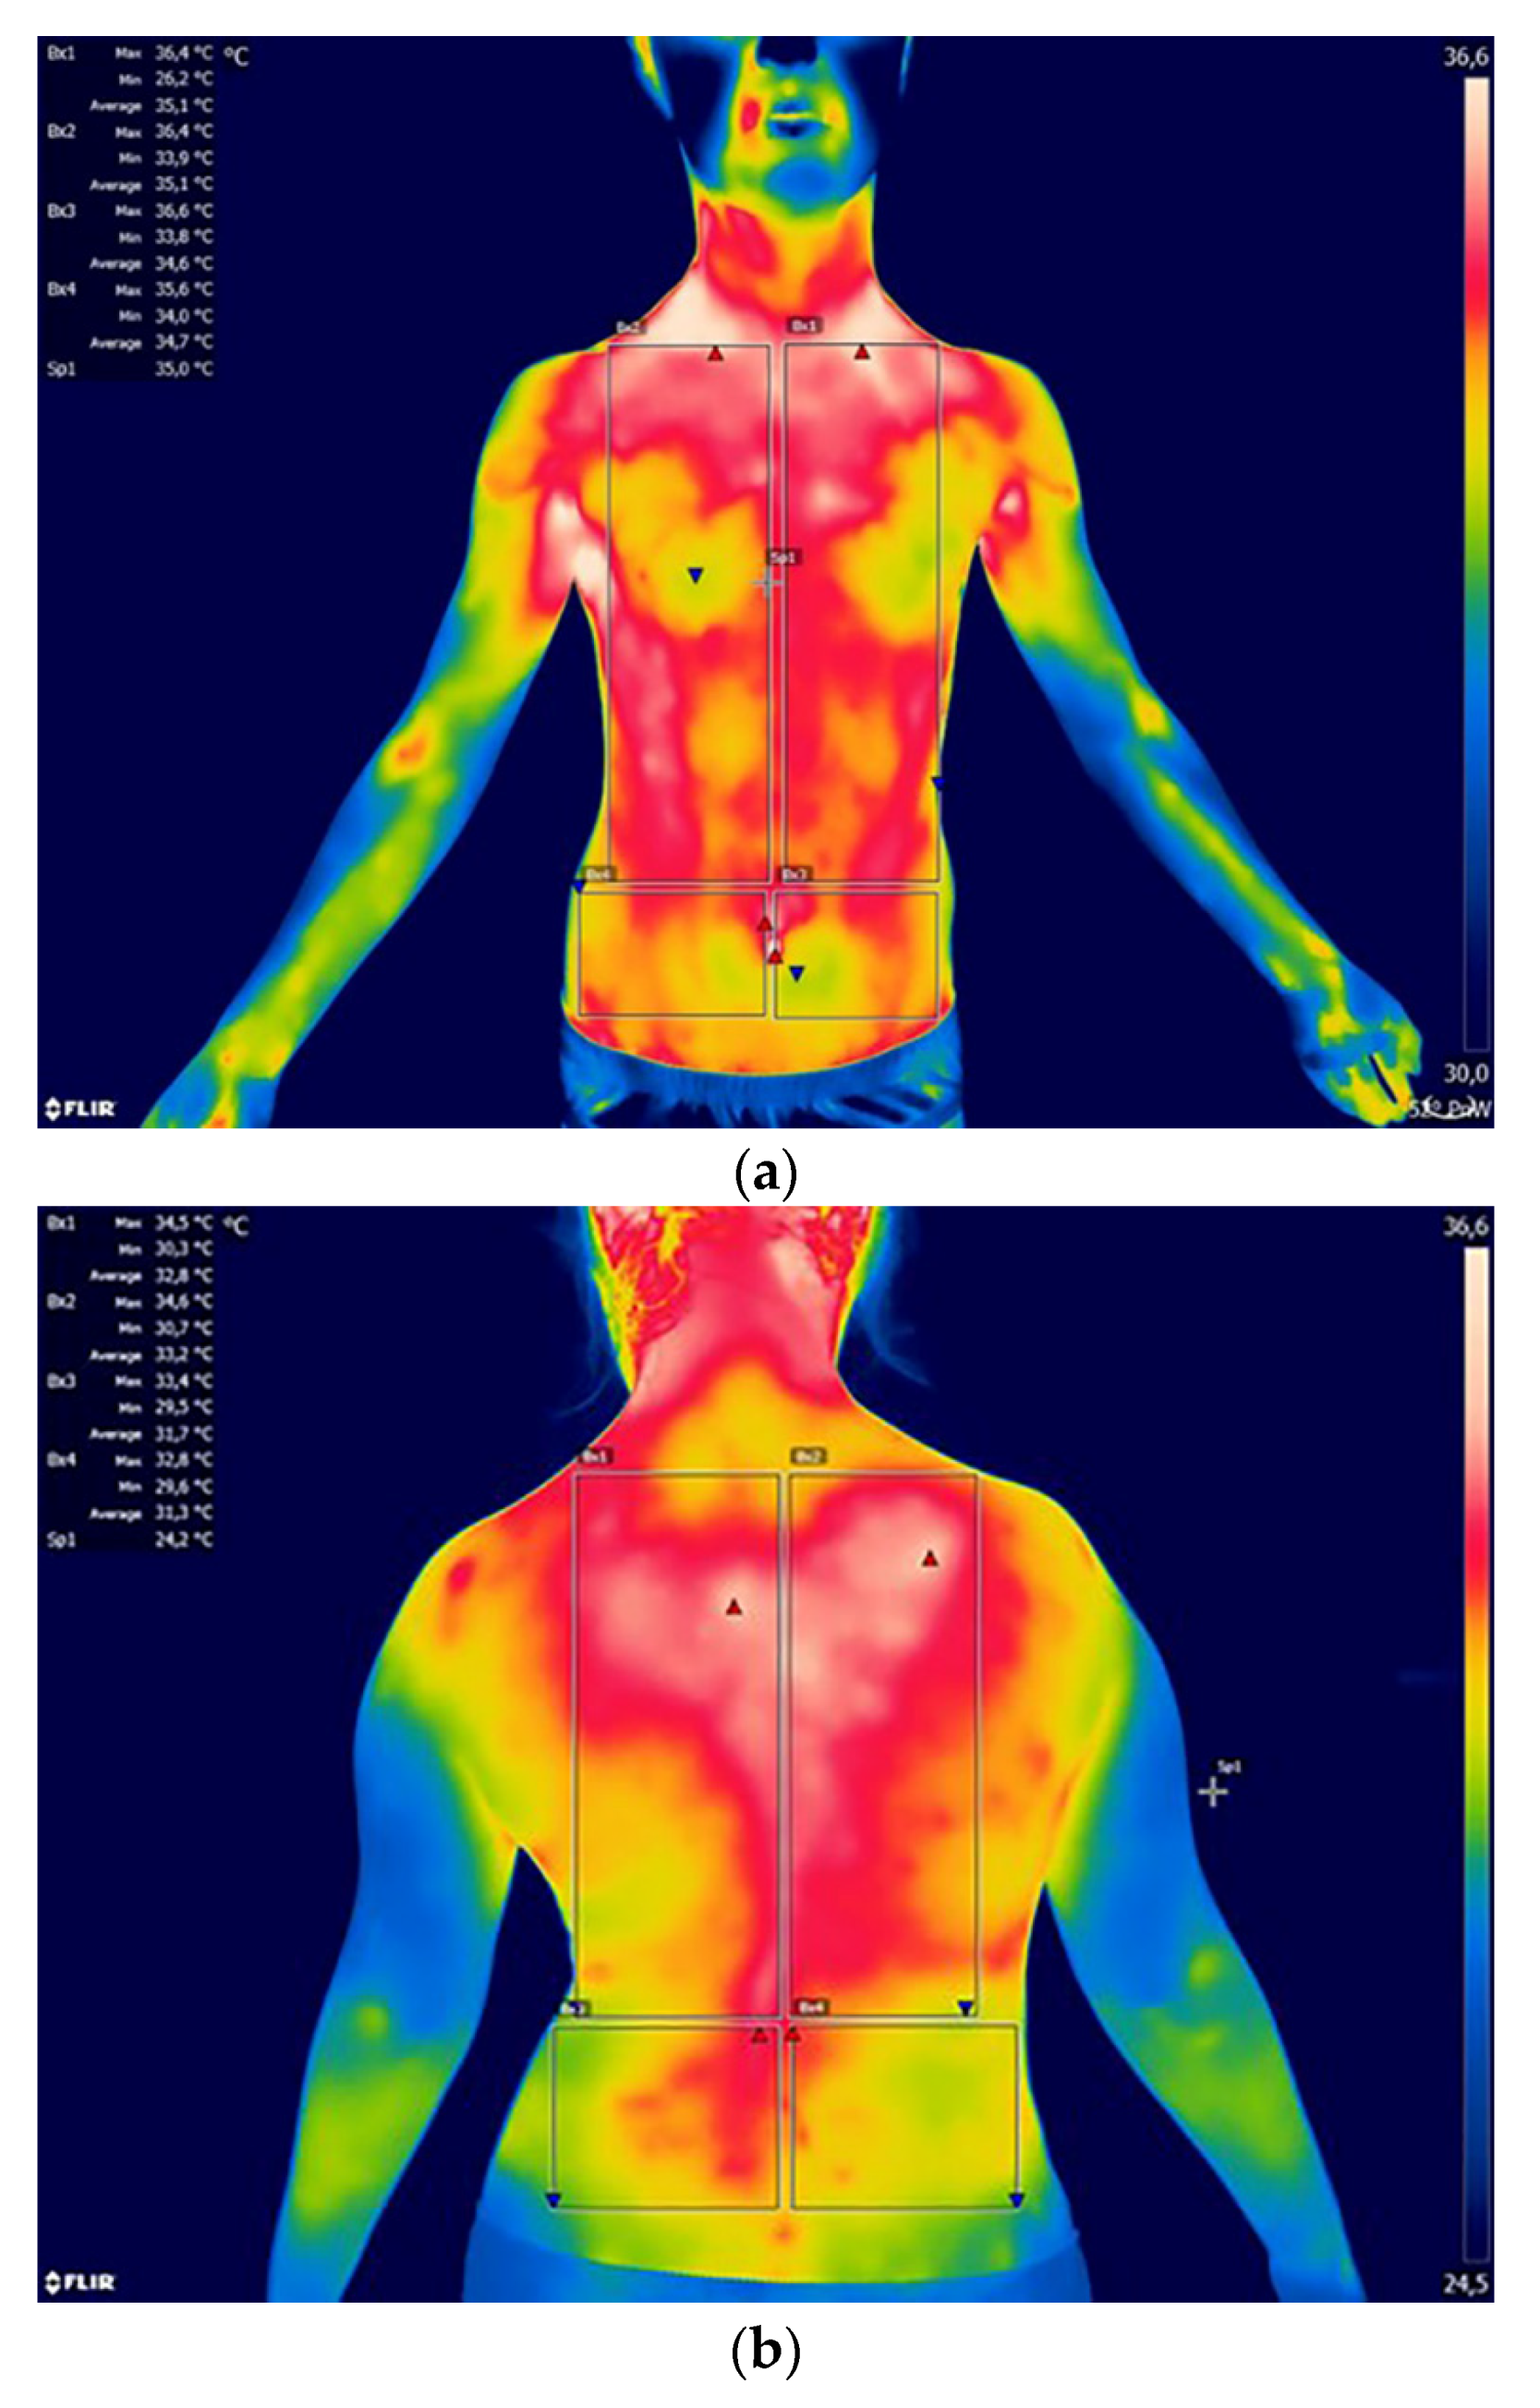 Relevance of low-pressure compression corsets in physiotherapeutic